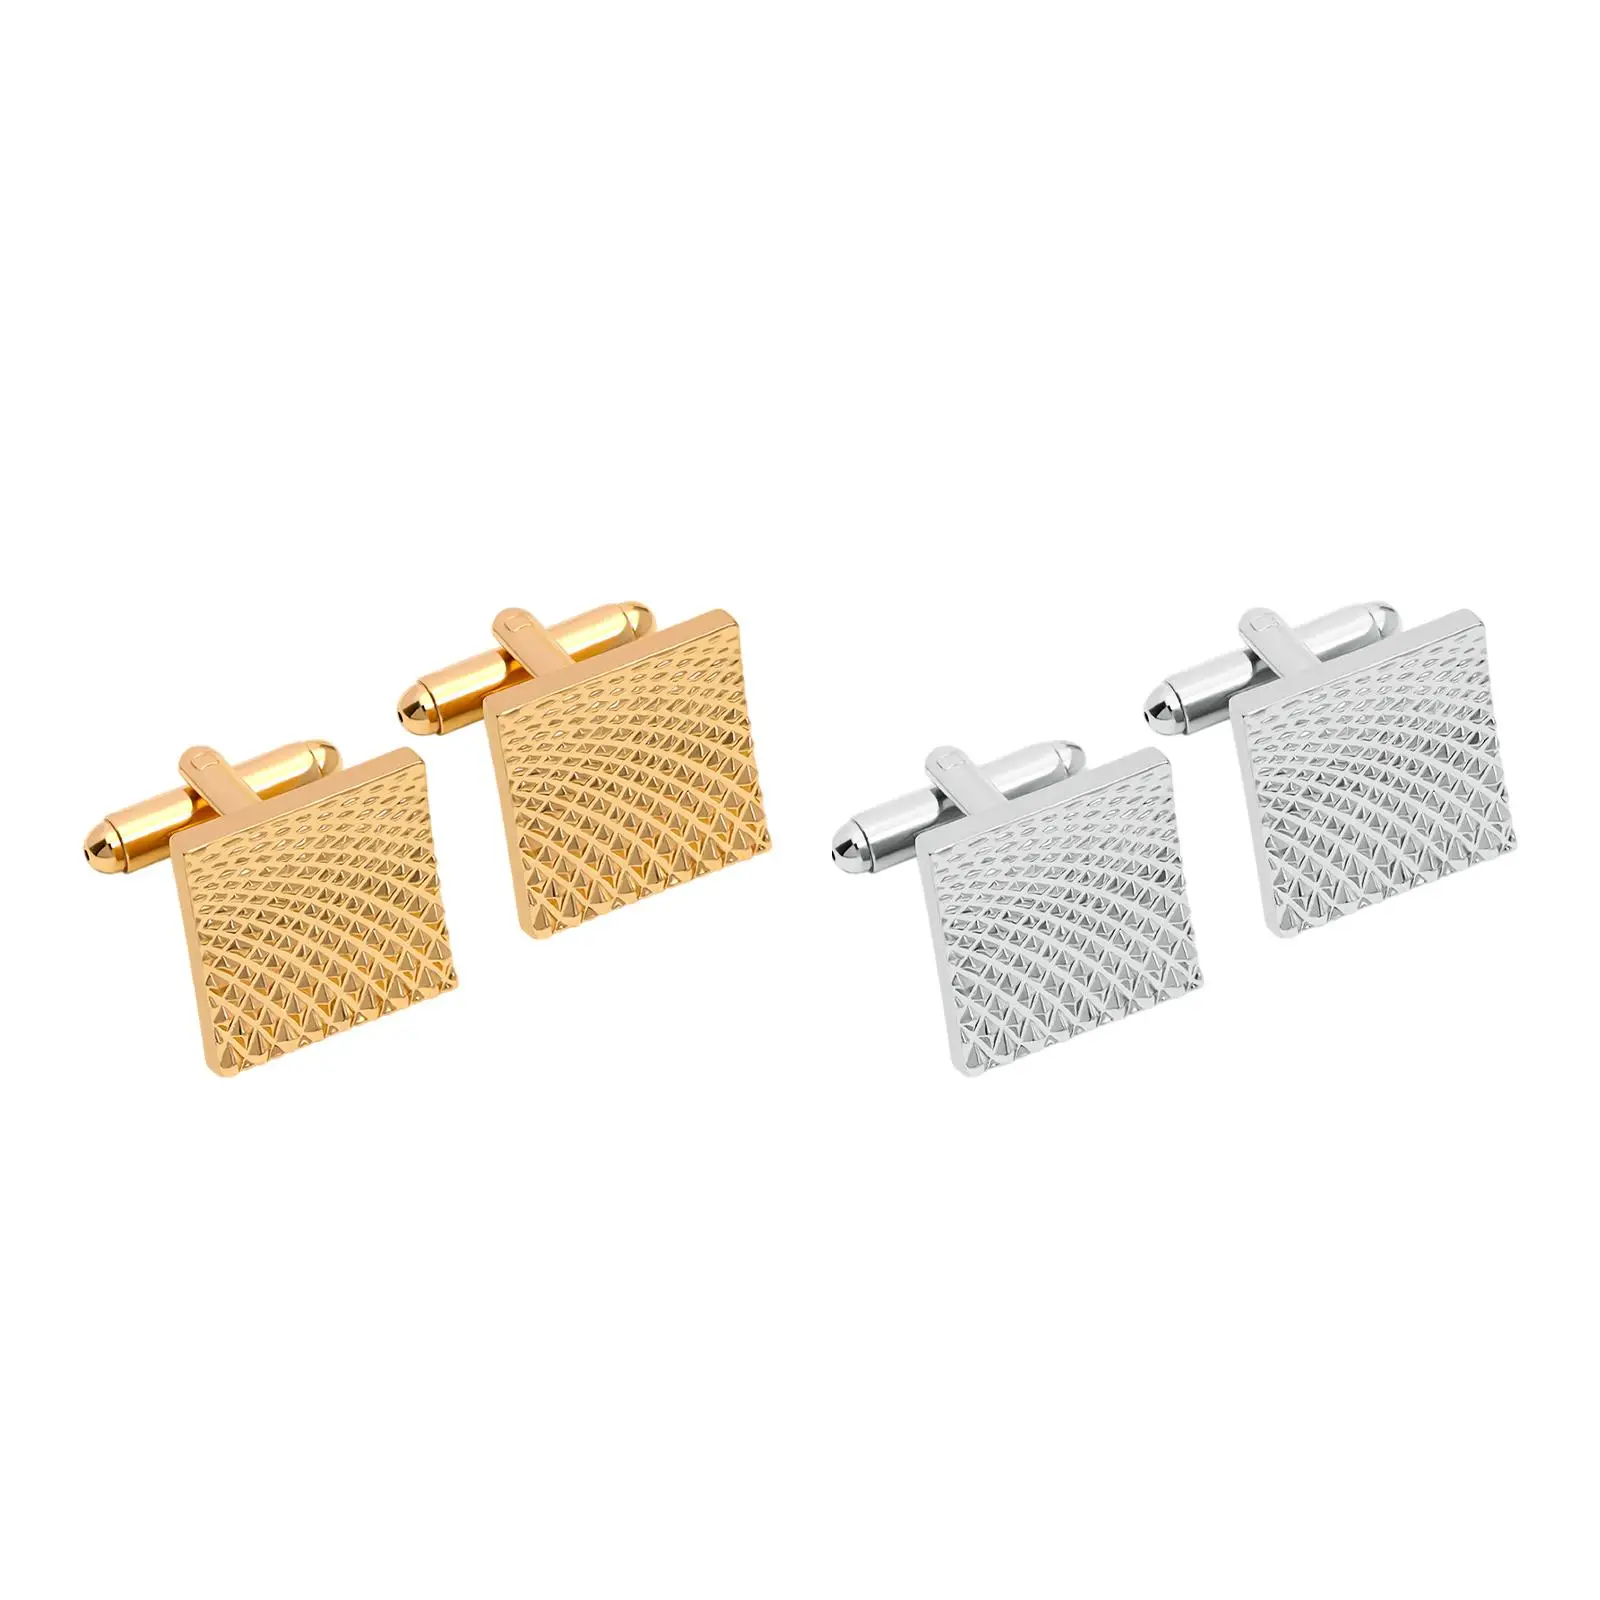 1  Cufflinks Gentleman Style Sturdy Stylish Quality Polished Durable Delicate Cuff Links for Shirt Wedding Suits Meeting Daily